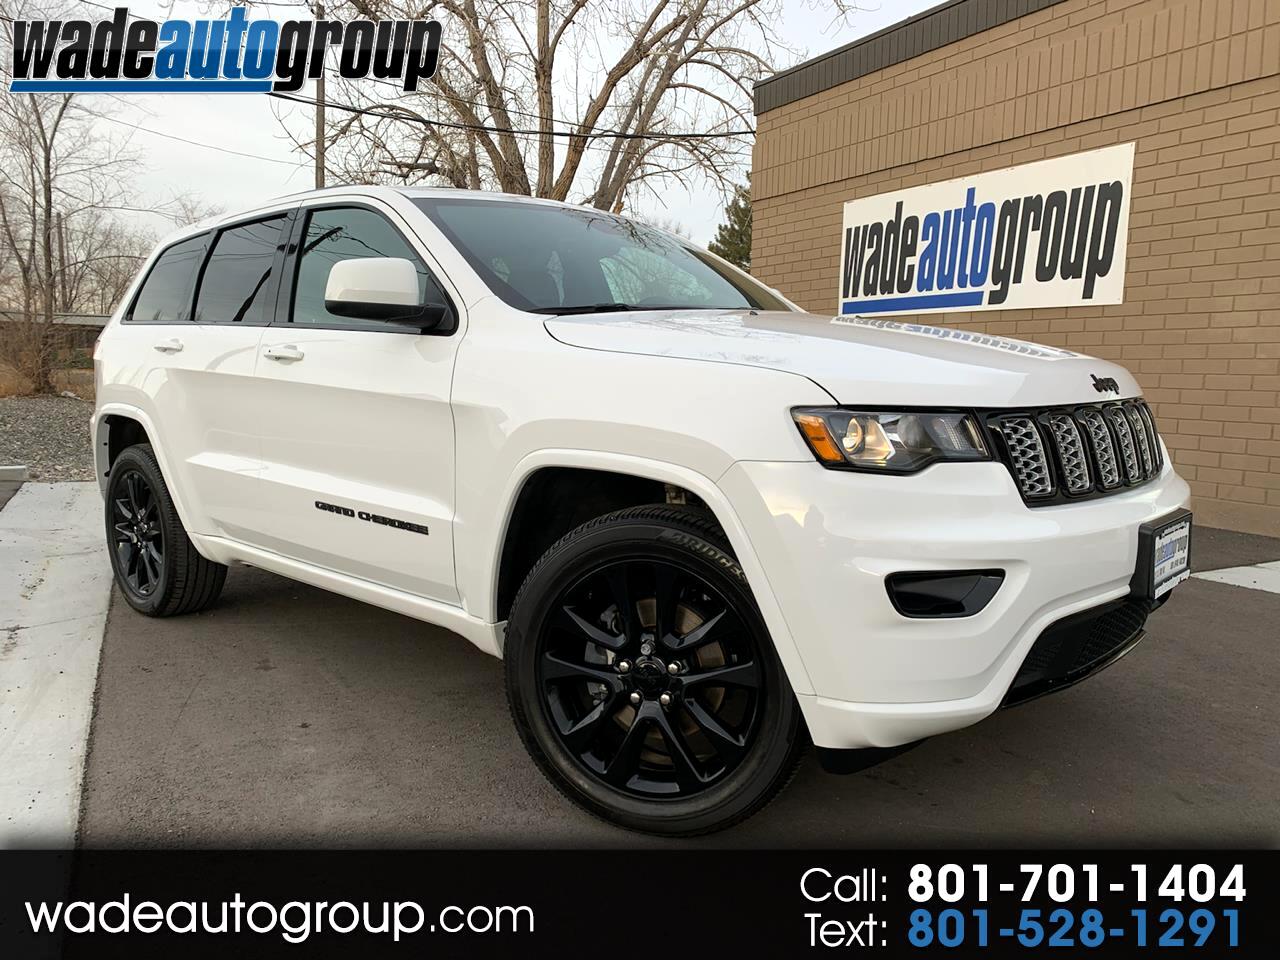 Used 2017 Jeep Grand Cherokee Altitude 4wd For Sale In